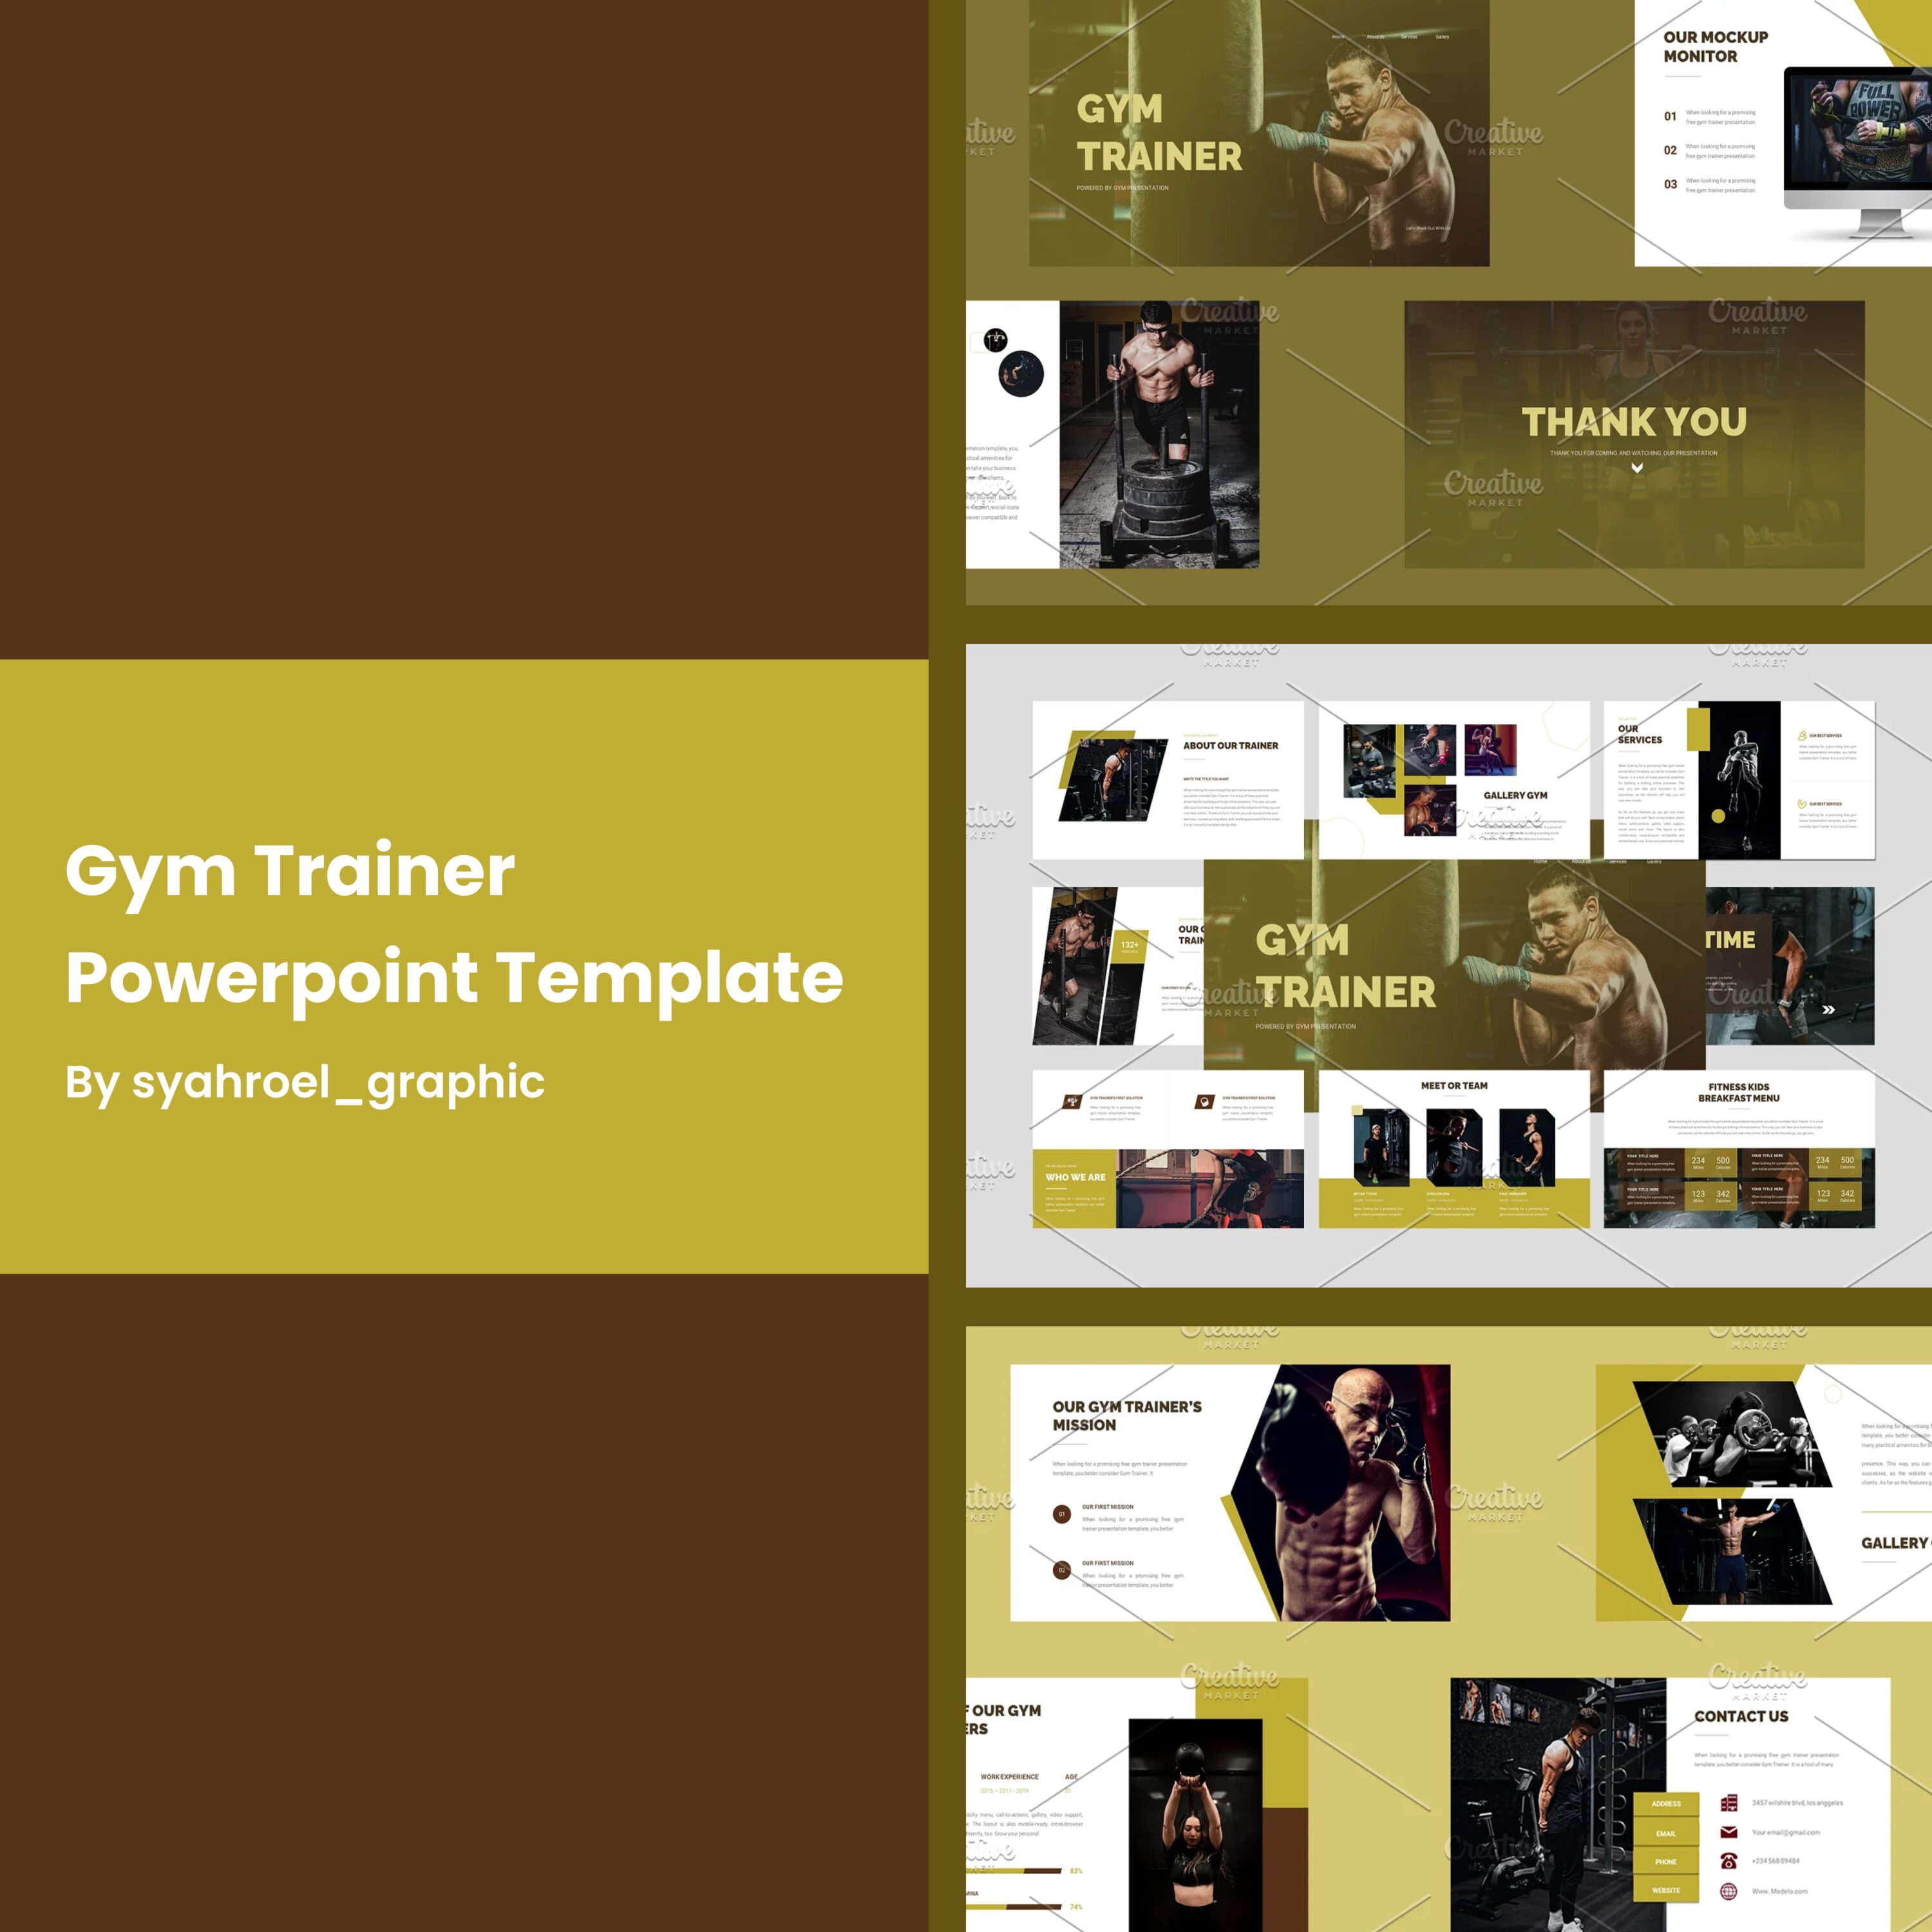 Gym Trainer Powerpoint Template.